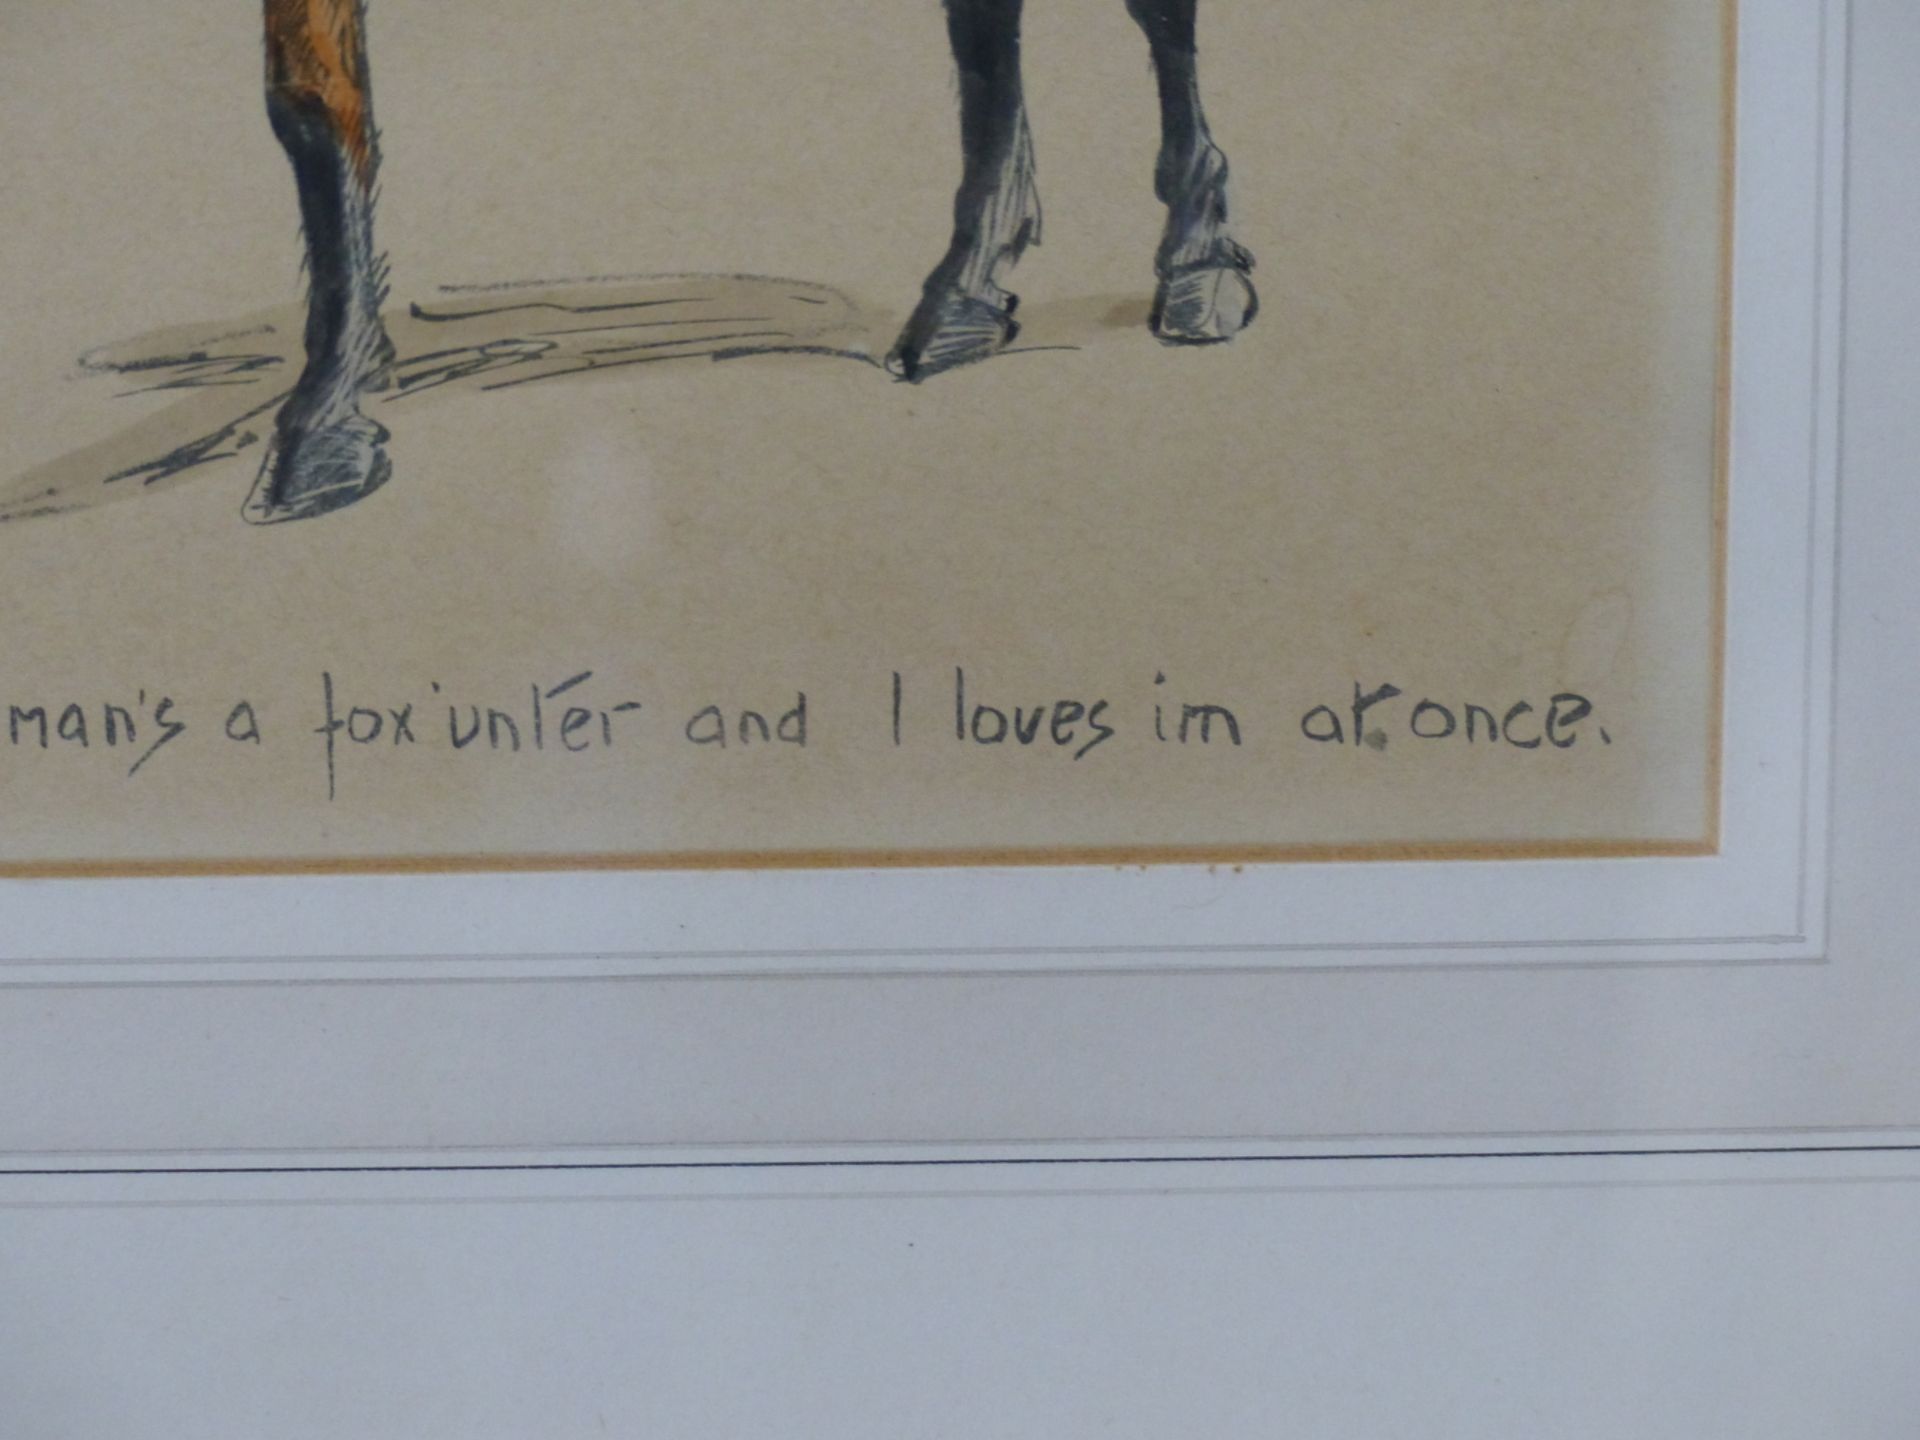 SNAFFLES (CHARLES JOHNSON PAYNE) A COMIC PORTRAIT OF A HUNTSMAN, INSCRIBED TELL ME A MAN'S A FOX' ' - Image 5 of 7